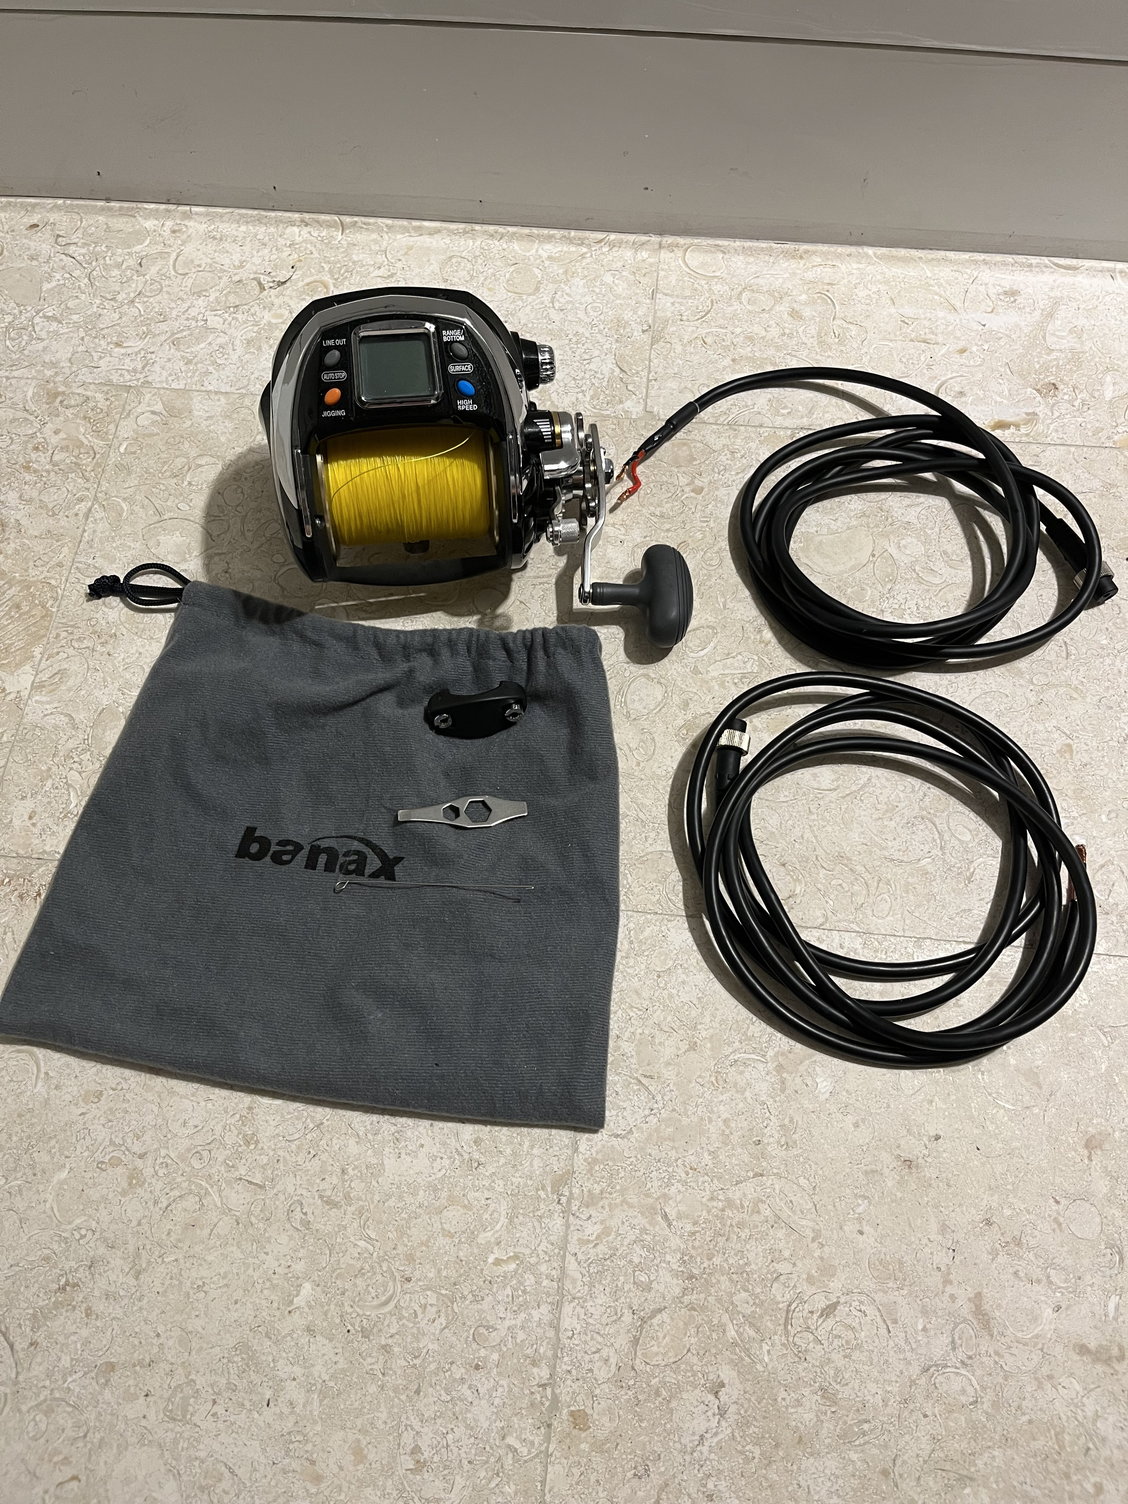 Banax Electric Reels - US Distribution and Repair - Frigate Sales & Service